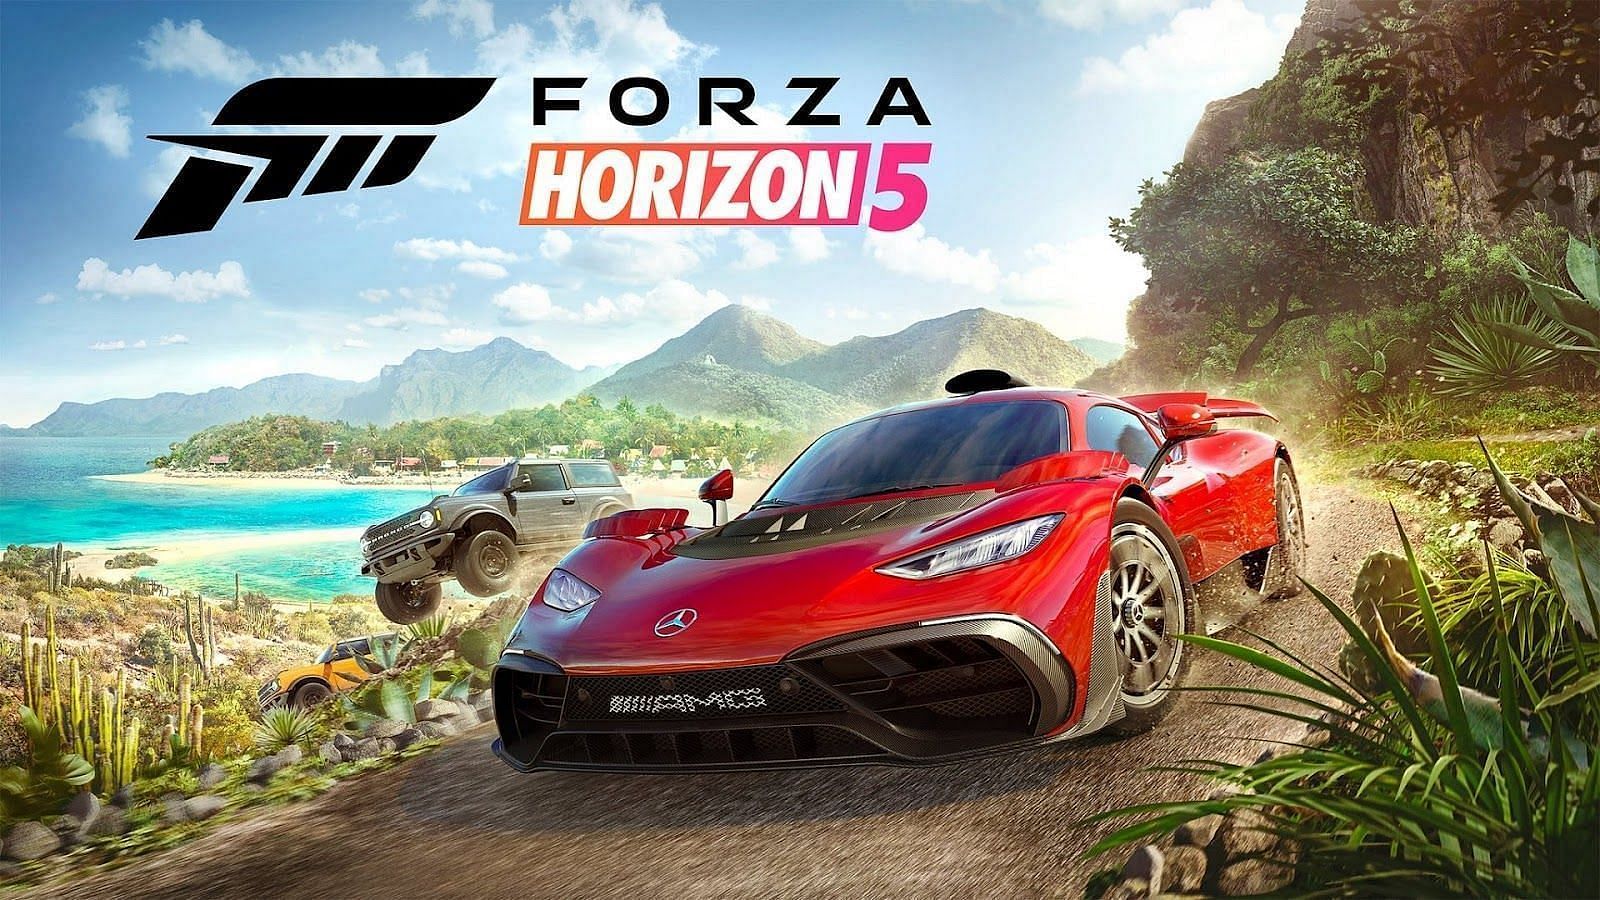 Forza Horizon 5 has broken multiple Xbox and Game Pass records since its release (Image via Steam)